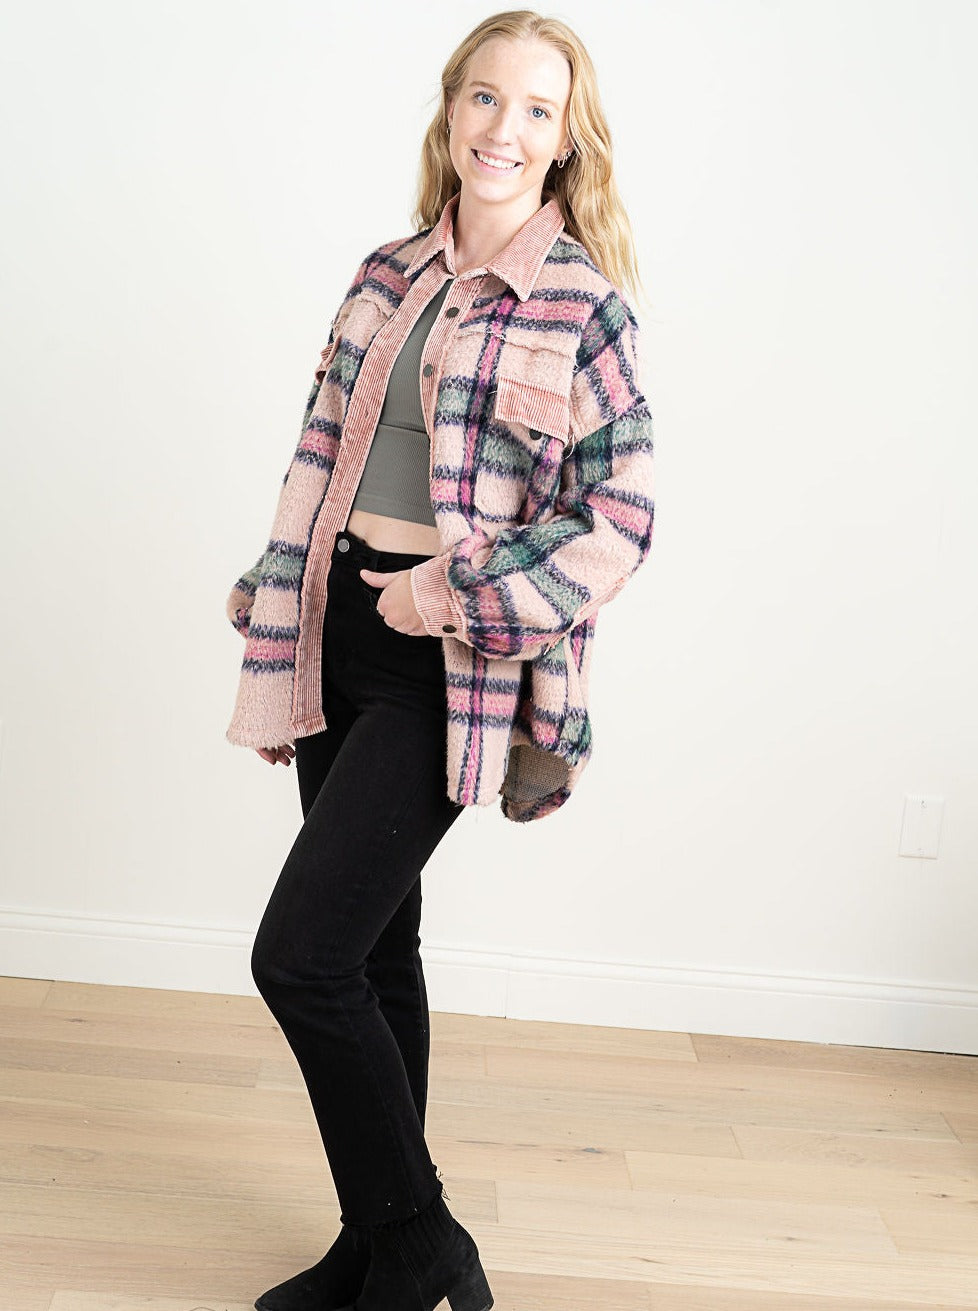 Pinky Promise Plaid Shacket | Pink plaid jacket has corduroy contrast collar, relaxed fit and dropped shoulder fit. Corduroy detail on pocket, elbow and cuffs. Star embroidery patch on the center back. Brand: POL Fiber Content: 100% Cotton  Runs large